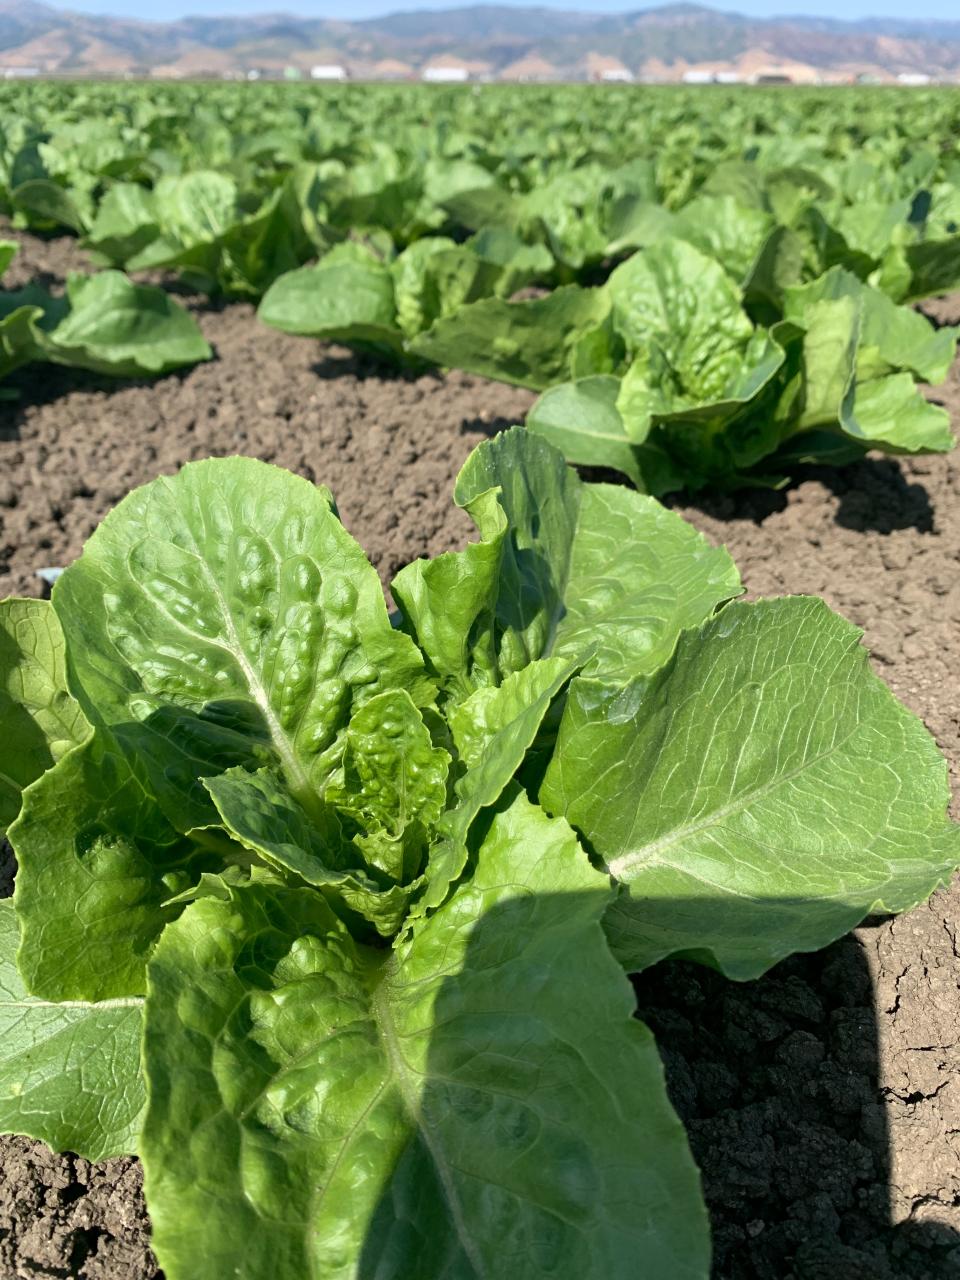 Romaine lettuce growing in a field in California's Salinas valley.